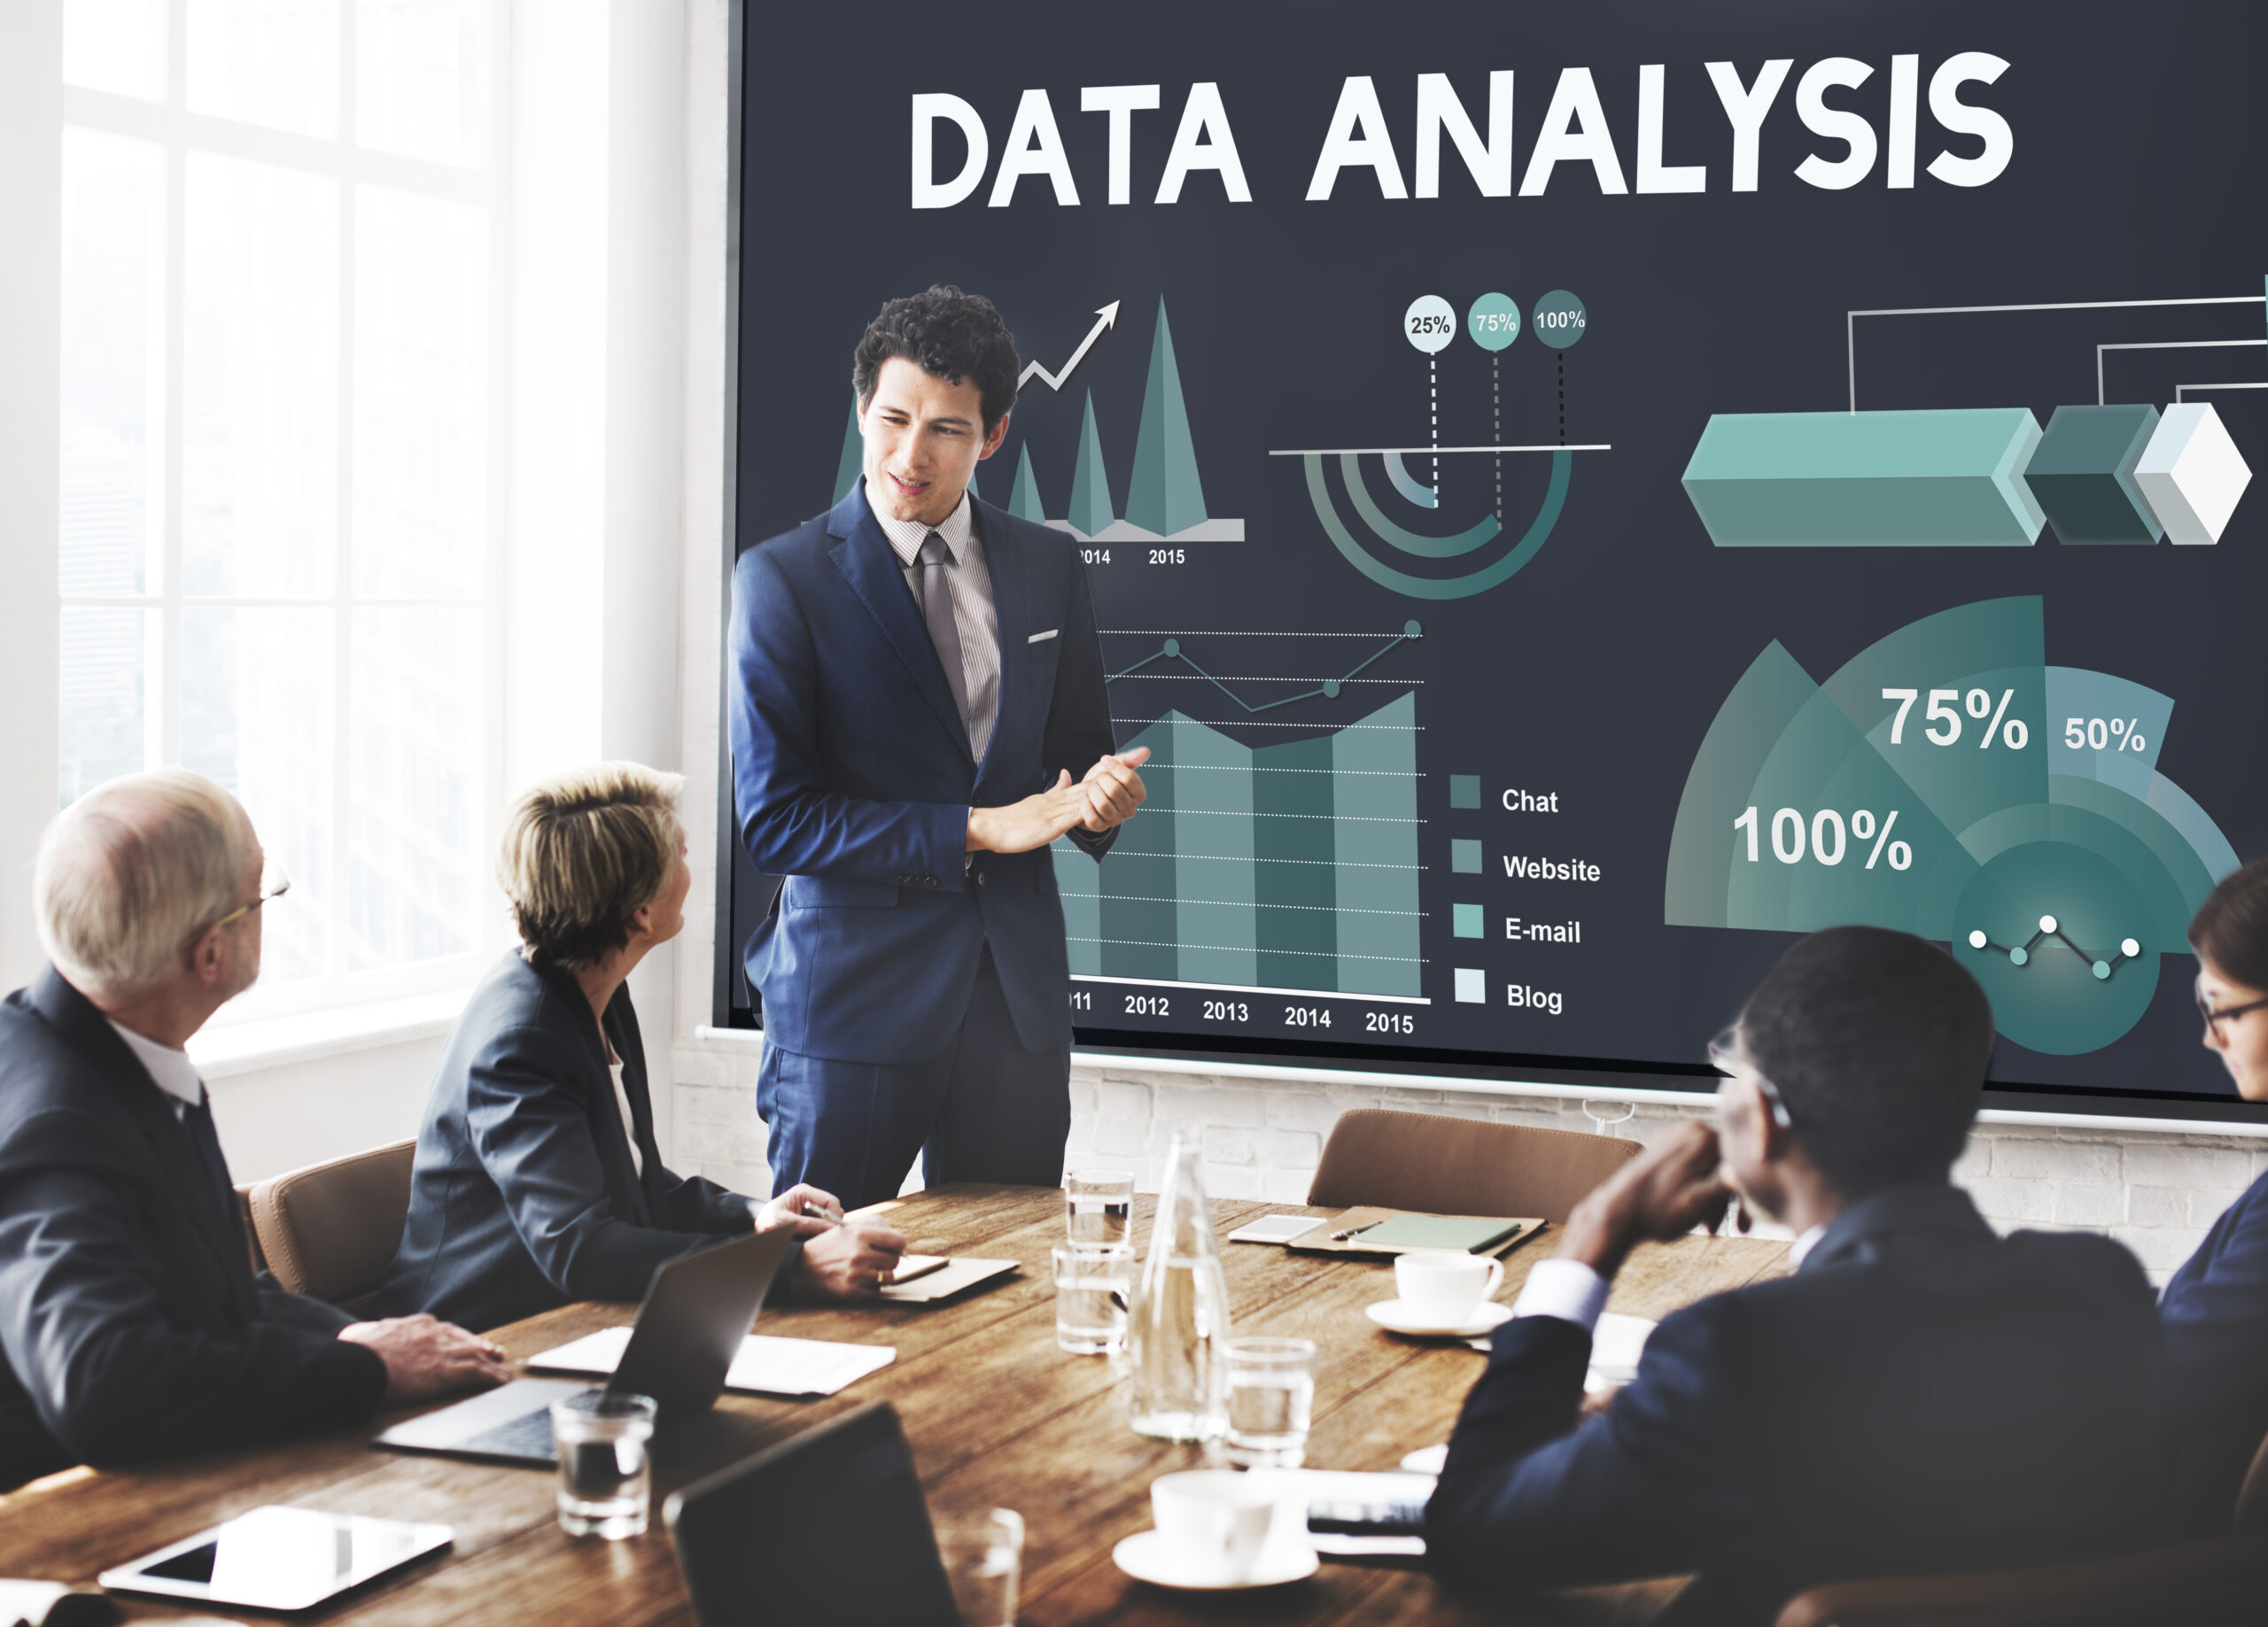 ELEVATE YOUR DATA ANALYTICS SKILLS WITH A LEVEL 7 PGD IN DATA SCIENCE